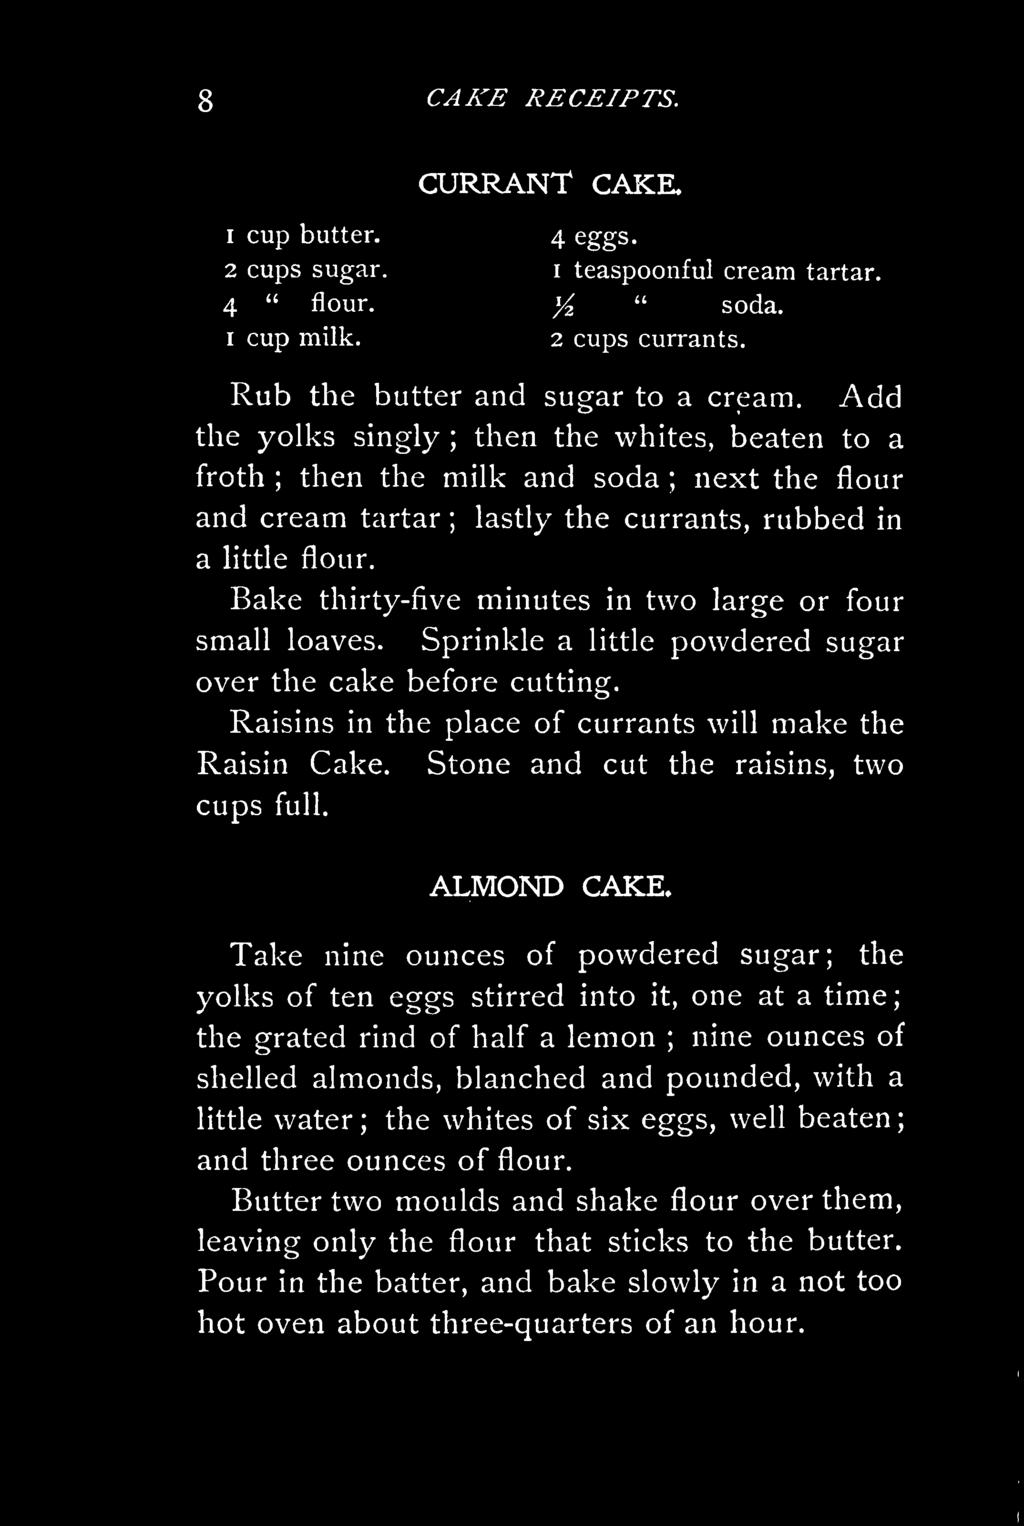 Bake thirty-five minutes in two large or four small loaves. Sprinkle a little powdered sugar over the cake before cutting. Raisins in the place of currants will make the Raisin Cake.